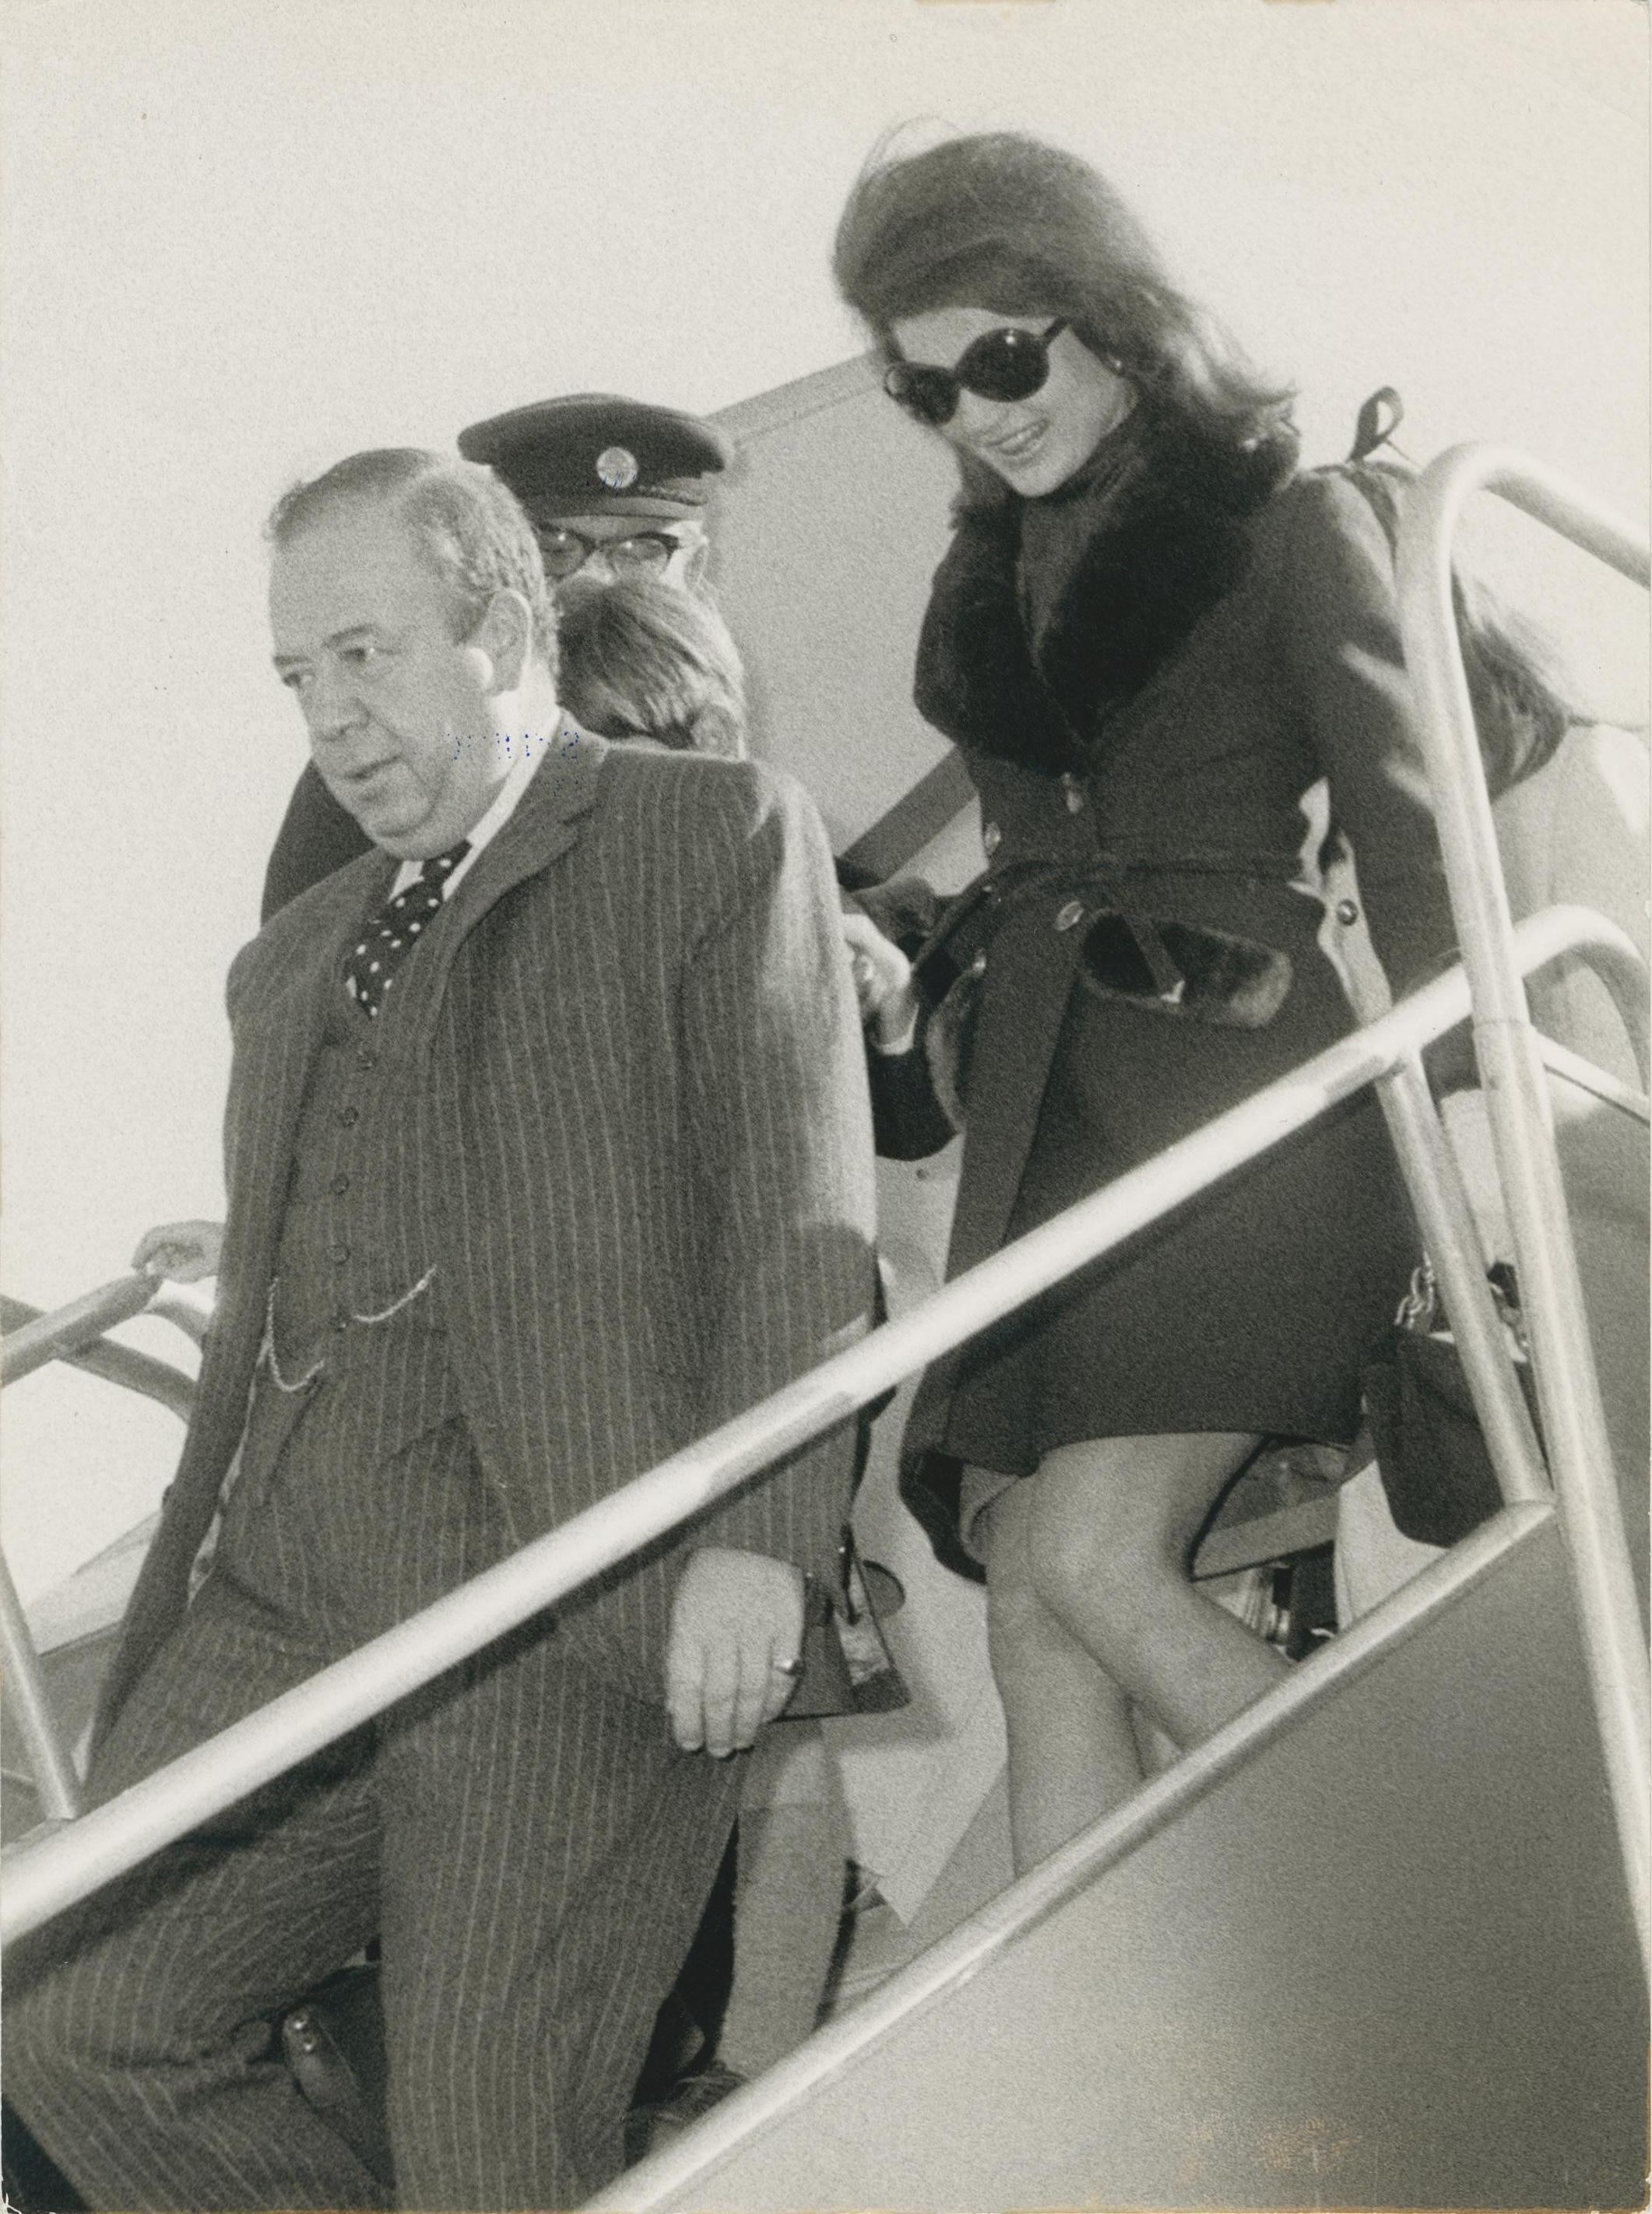 Unknown Black and White Photograph - Jackie Kennedy leaving the plane, 1970s